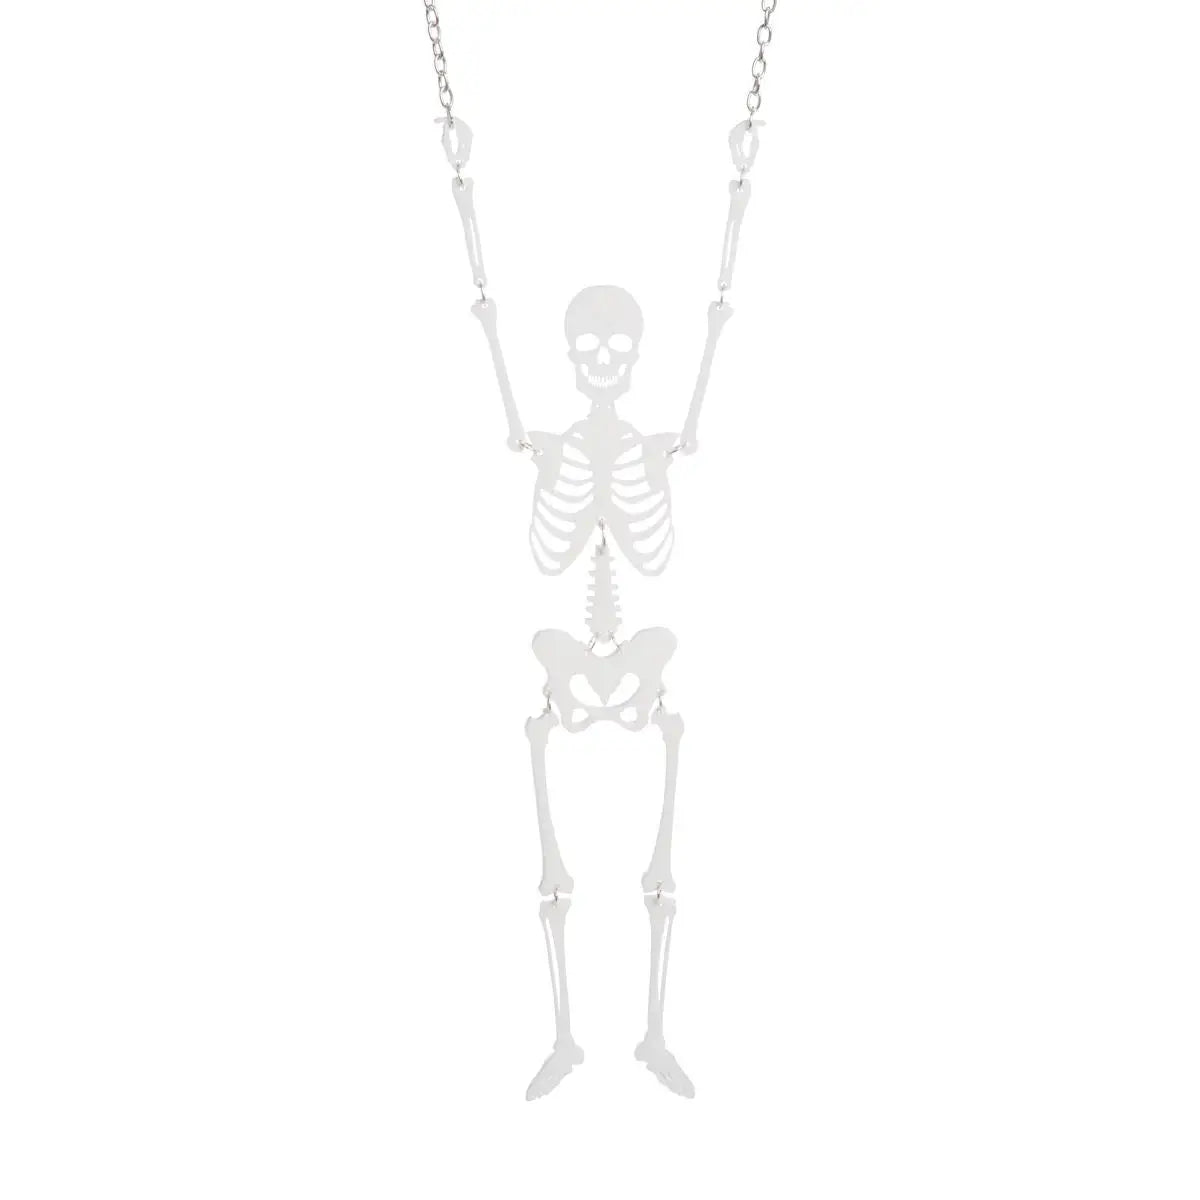 A large white laser-cut acrylic necklace of an articulated skeleton with jump rings at each joint. On a silver plated round link chain 